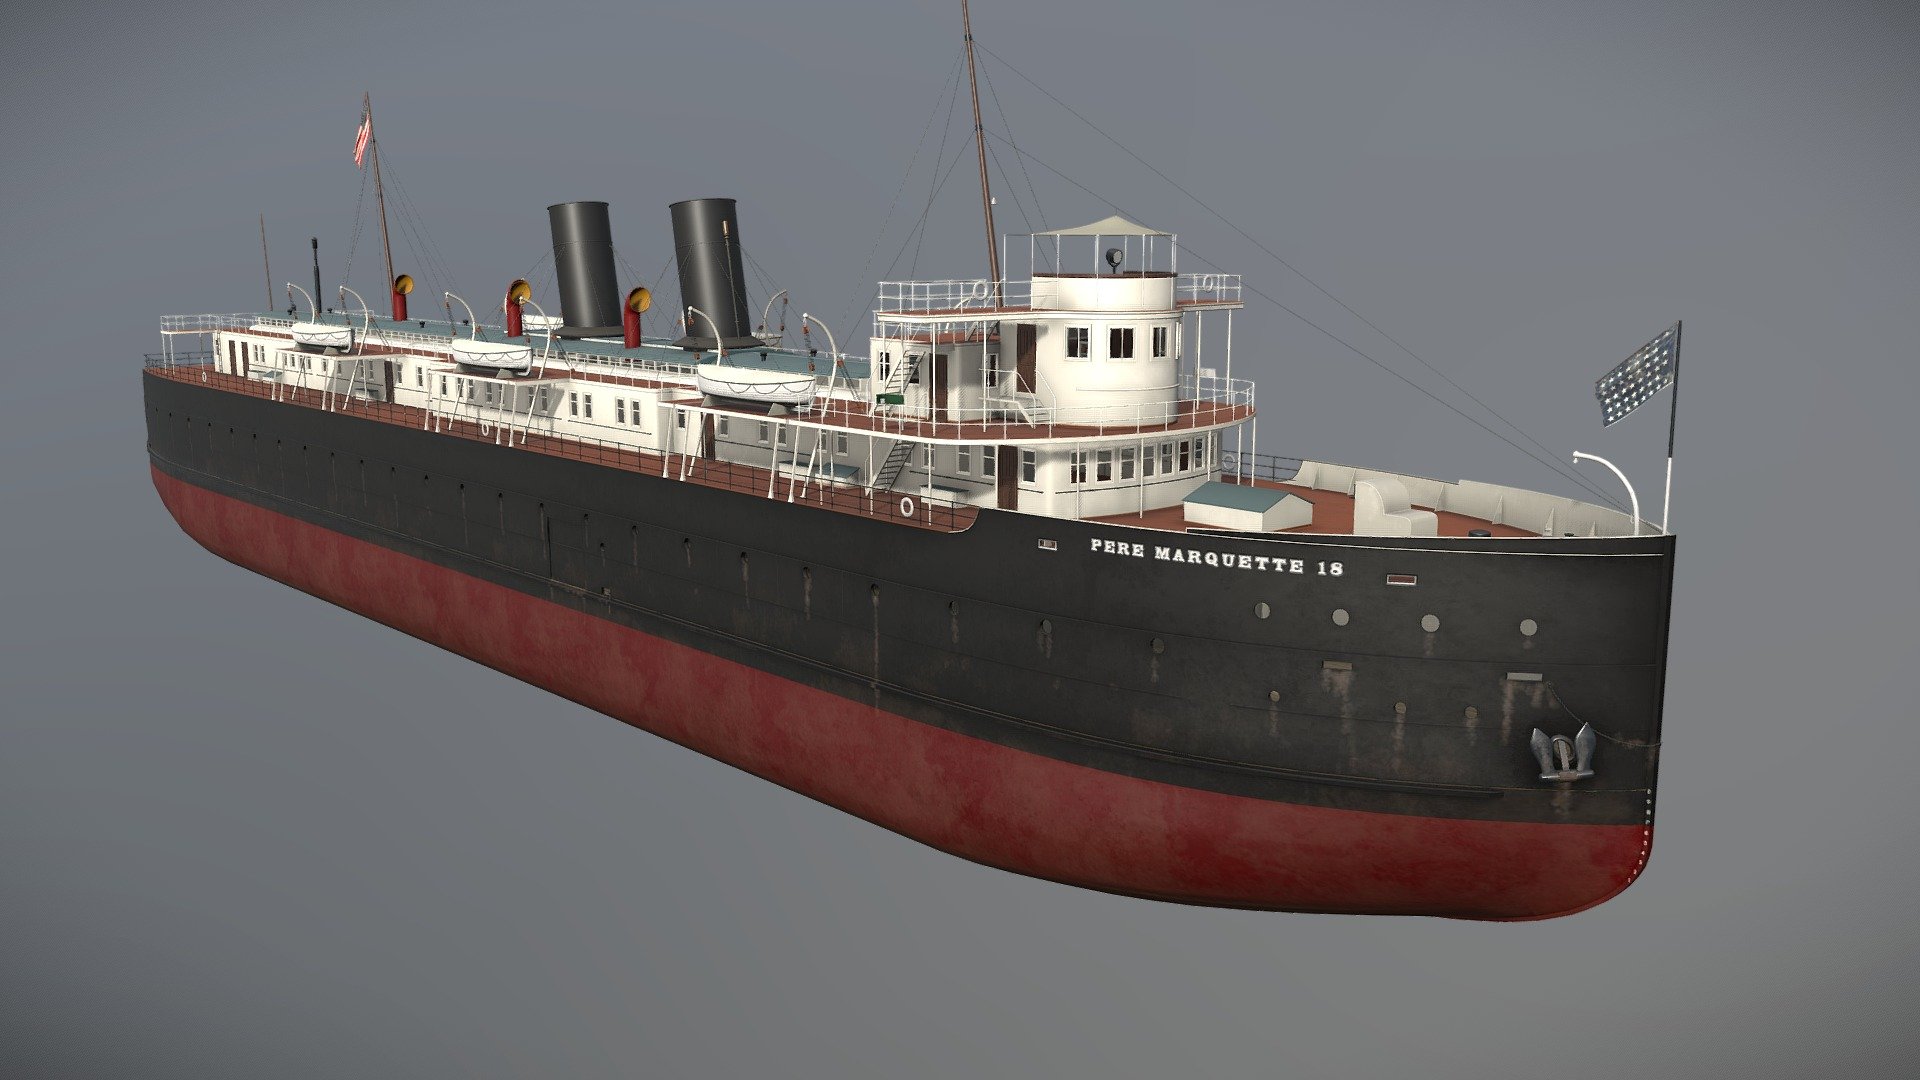 SS Pere Marquette 18 was a steel-hulled Great Lakes train ferry that served on Lake Michigan (primarily between the four ports of Ludington, Michigan and Kewaunee, Manitowoc and Milwaukee, Wisconsin) from her construction in 1902 to her sinking in 1910 3d model